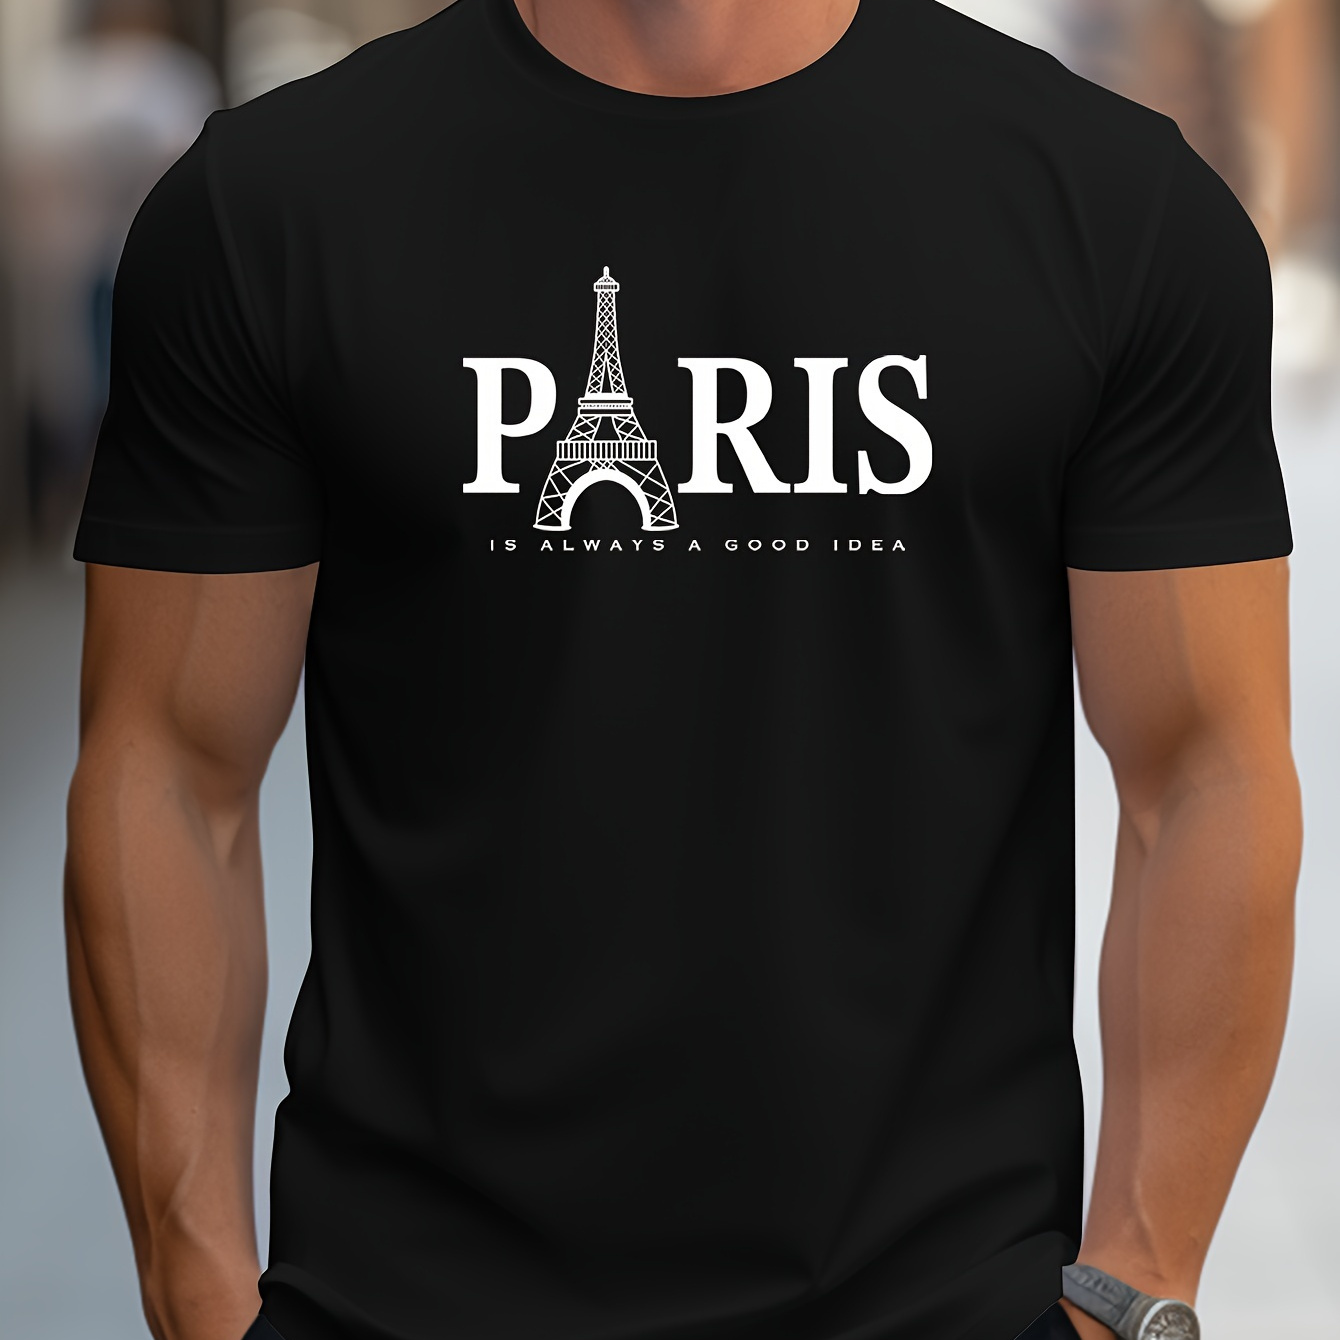 

Paris Letters Print Men's Round Neck Print Tee Short-sleeved Comfy T-shirt Loose Casual Top For Spring Summer Holiday Men's Clothing As Gifts